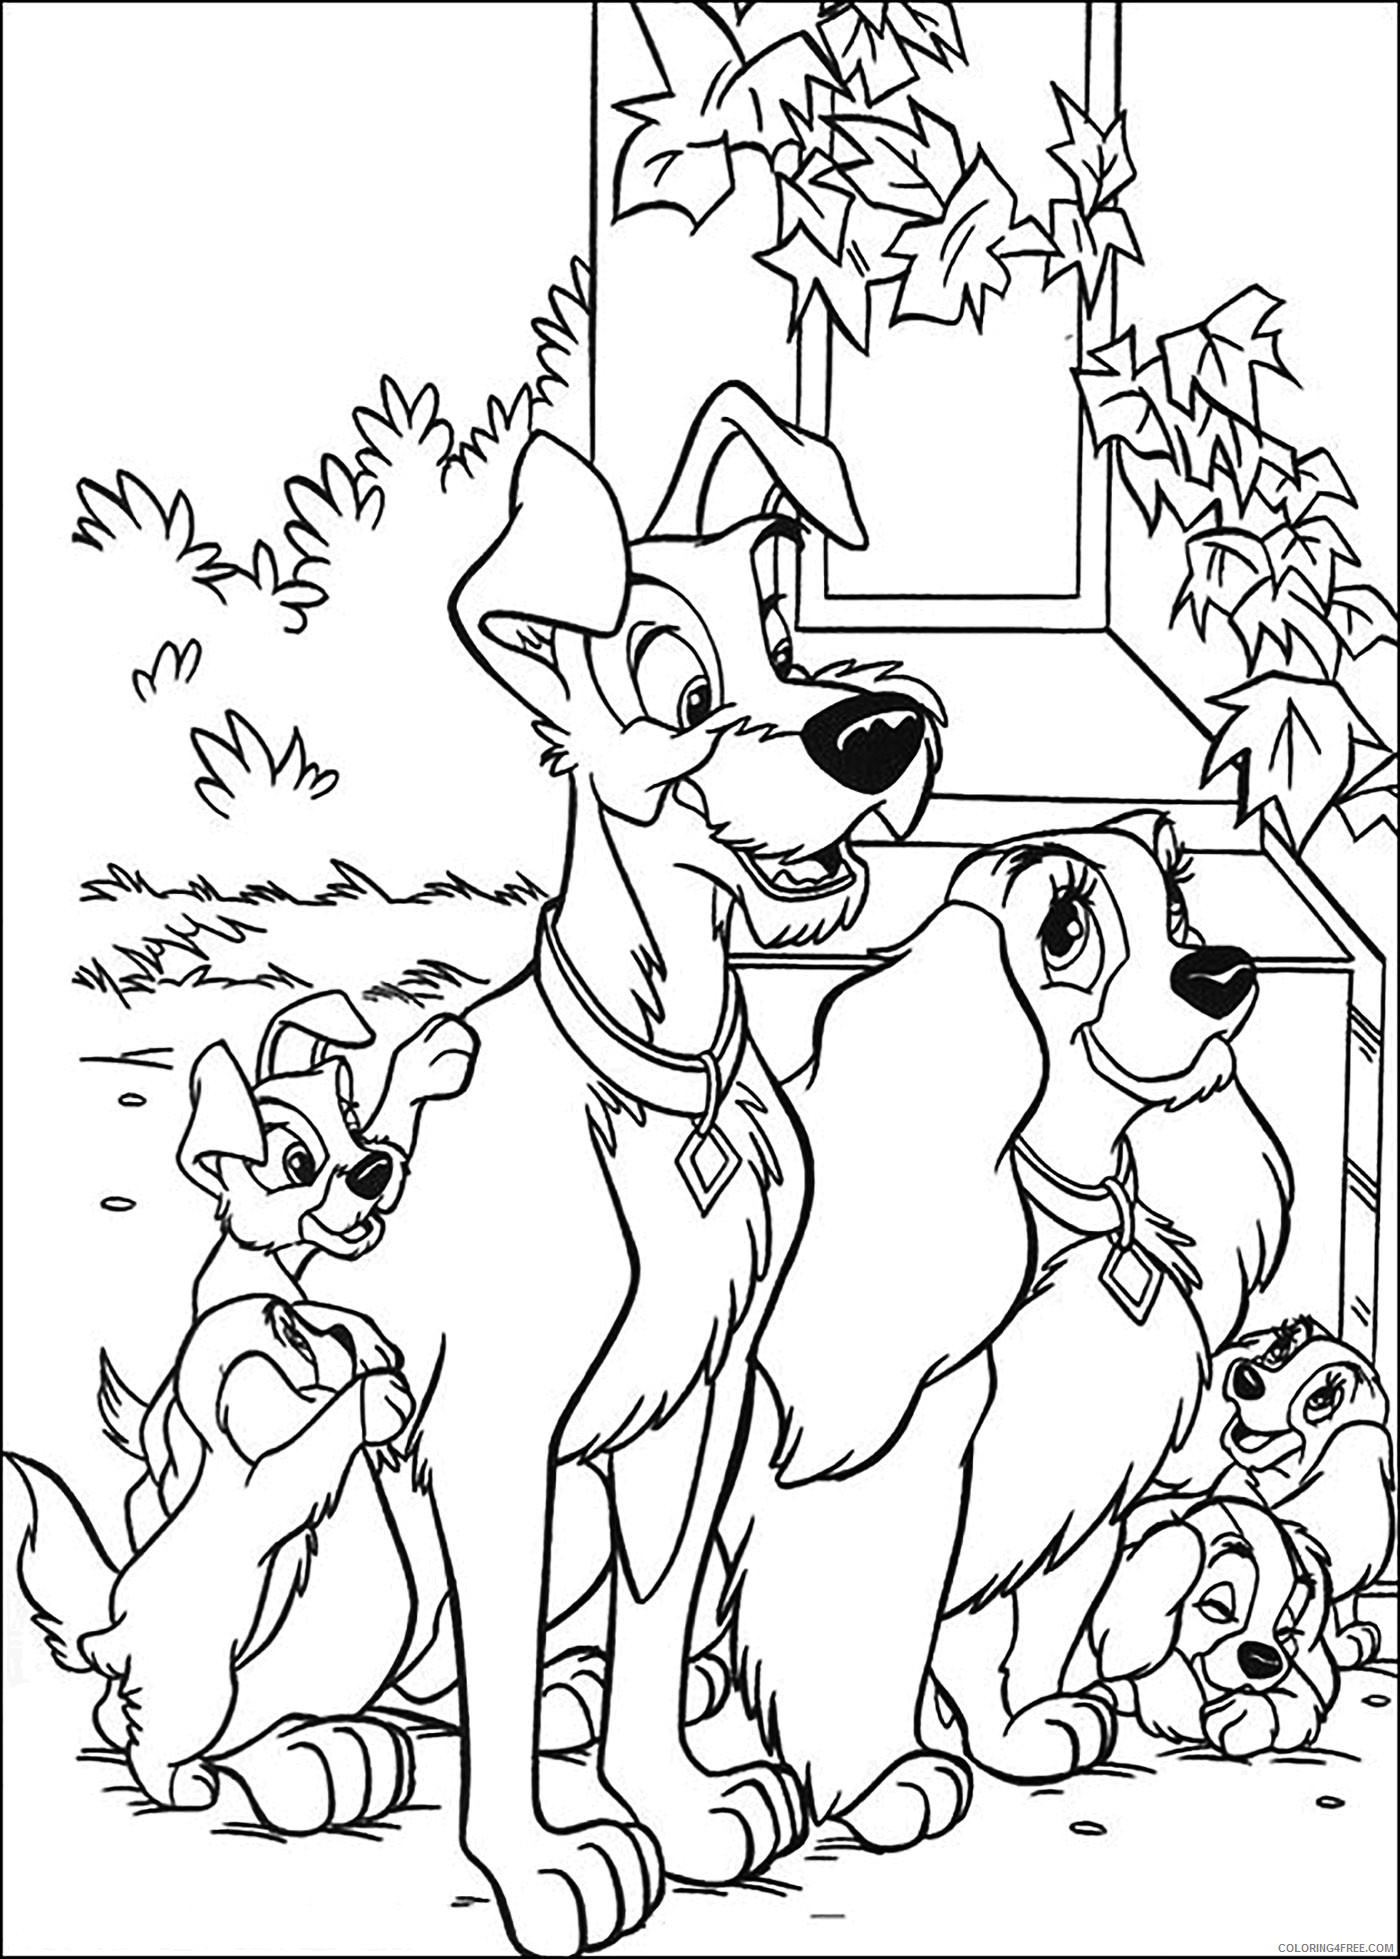 Lady and the Tramp Coloring Pages Cartoons Lady and The Tramp Characters Printable 2020 3568 Coloring4free